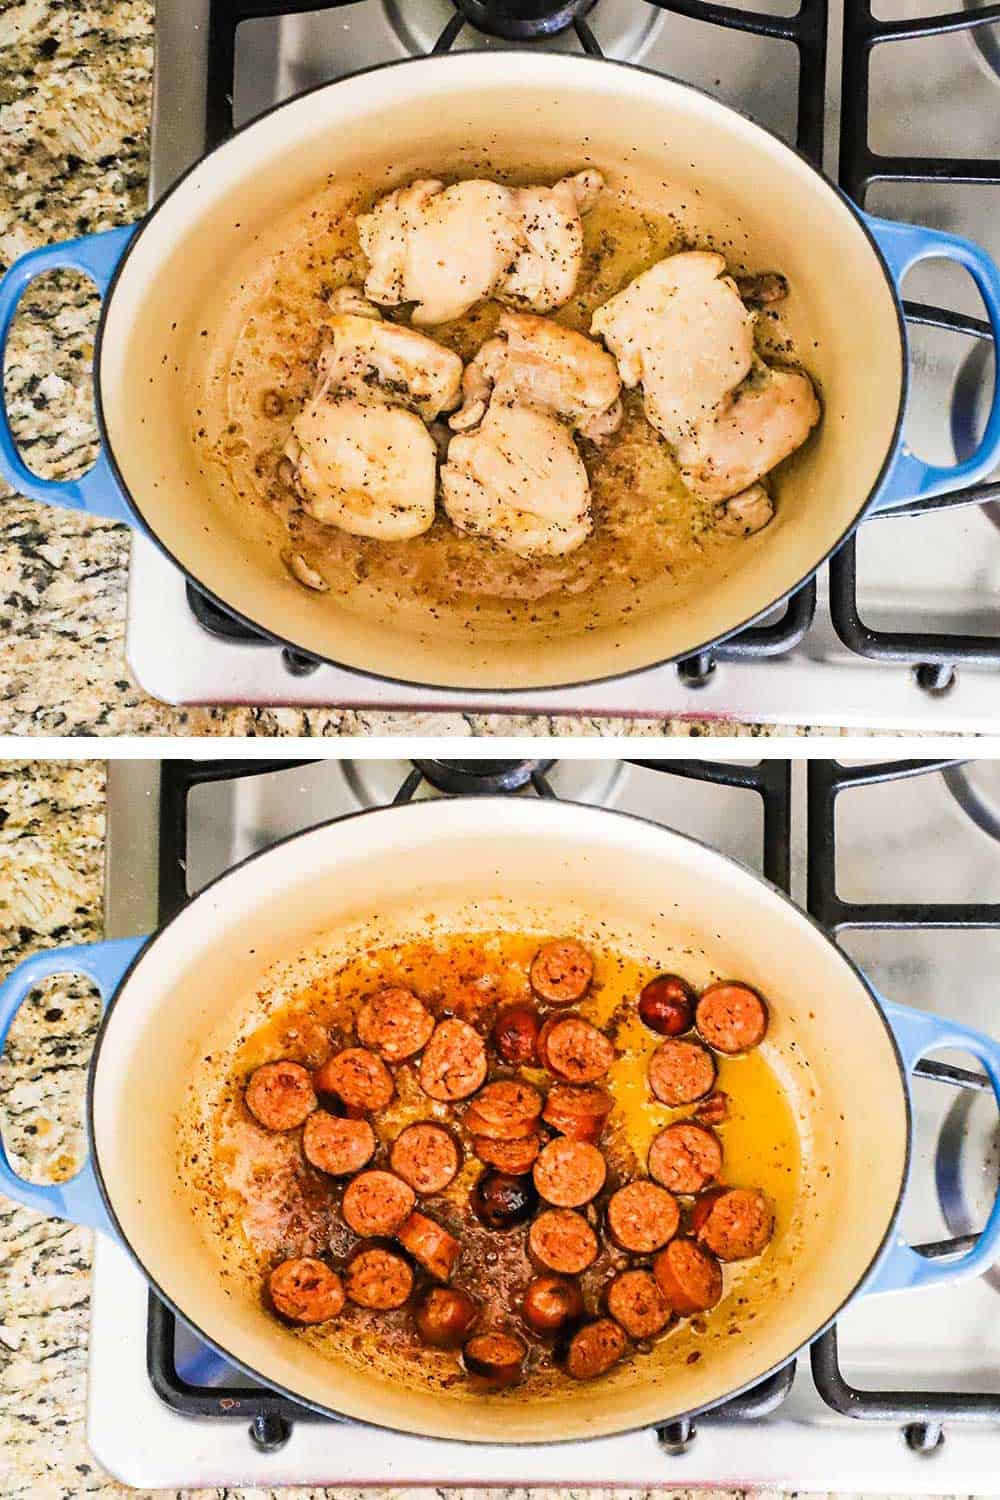 A large oval blue Dutch oven sitting on a stovetop with seared chicken thighs in it and then the same pot with seared slices of Andouille sausage in it.